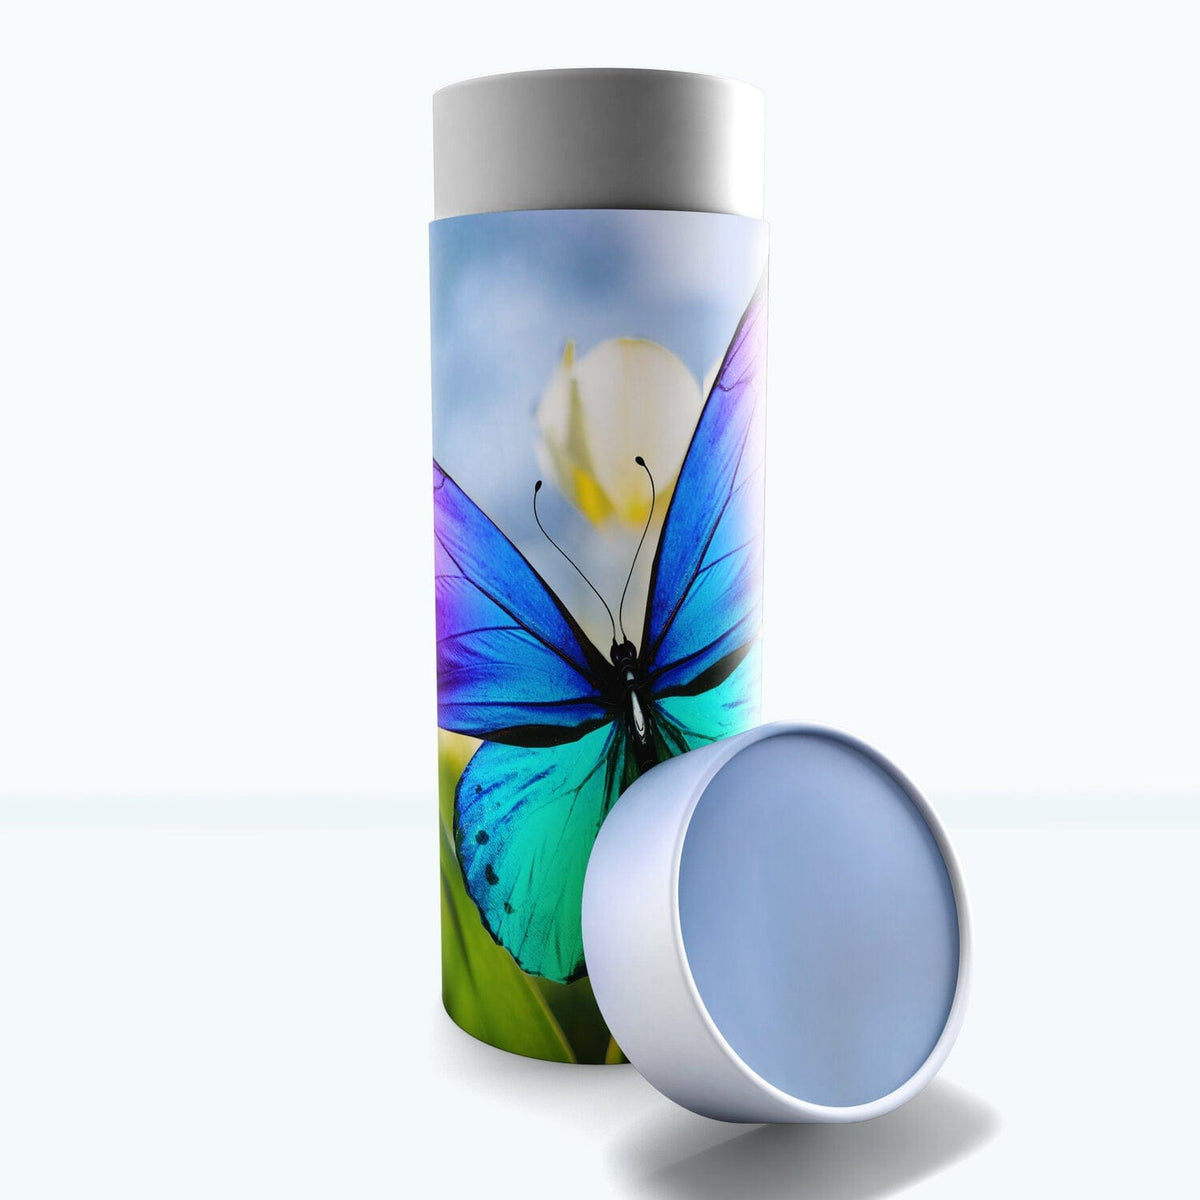 Commemorative Cremation Urns Small Wild Butterflies Biodegradable &amp; Eco Friendly Burial or Scattering Urn / Tube